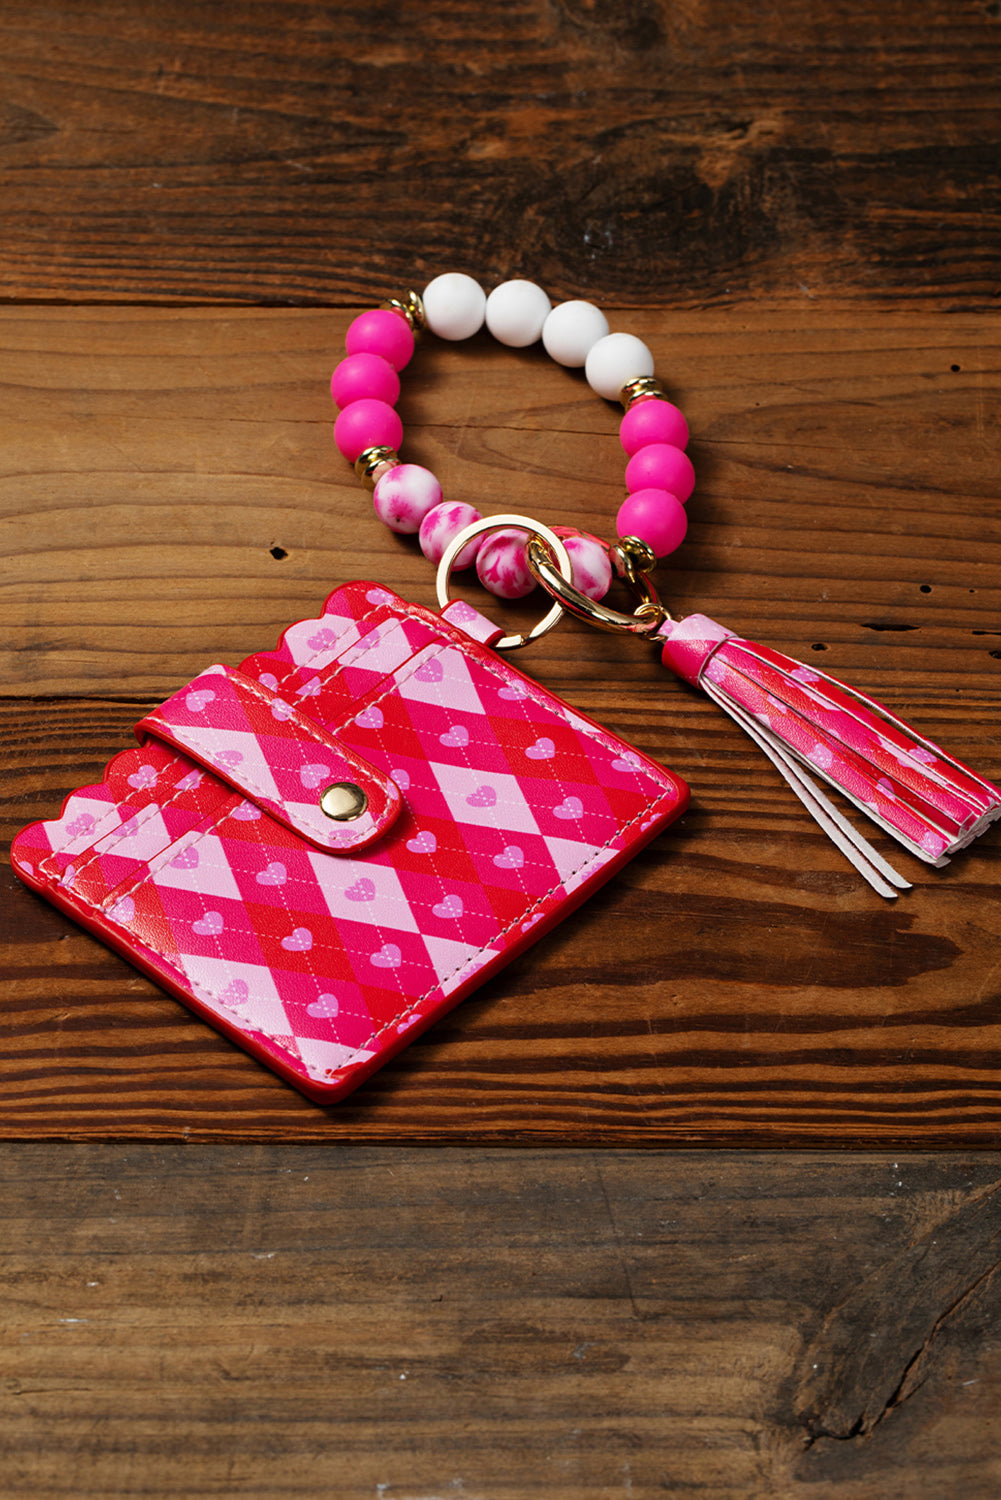 Rose Red Valentine Fashion PU Card Bag Key Chain with Silicone Bracelet